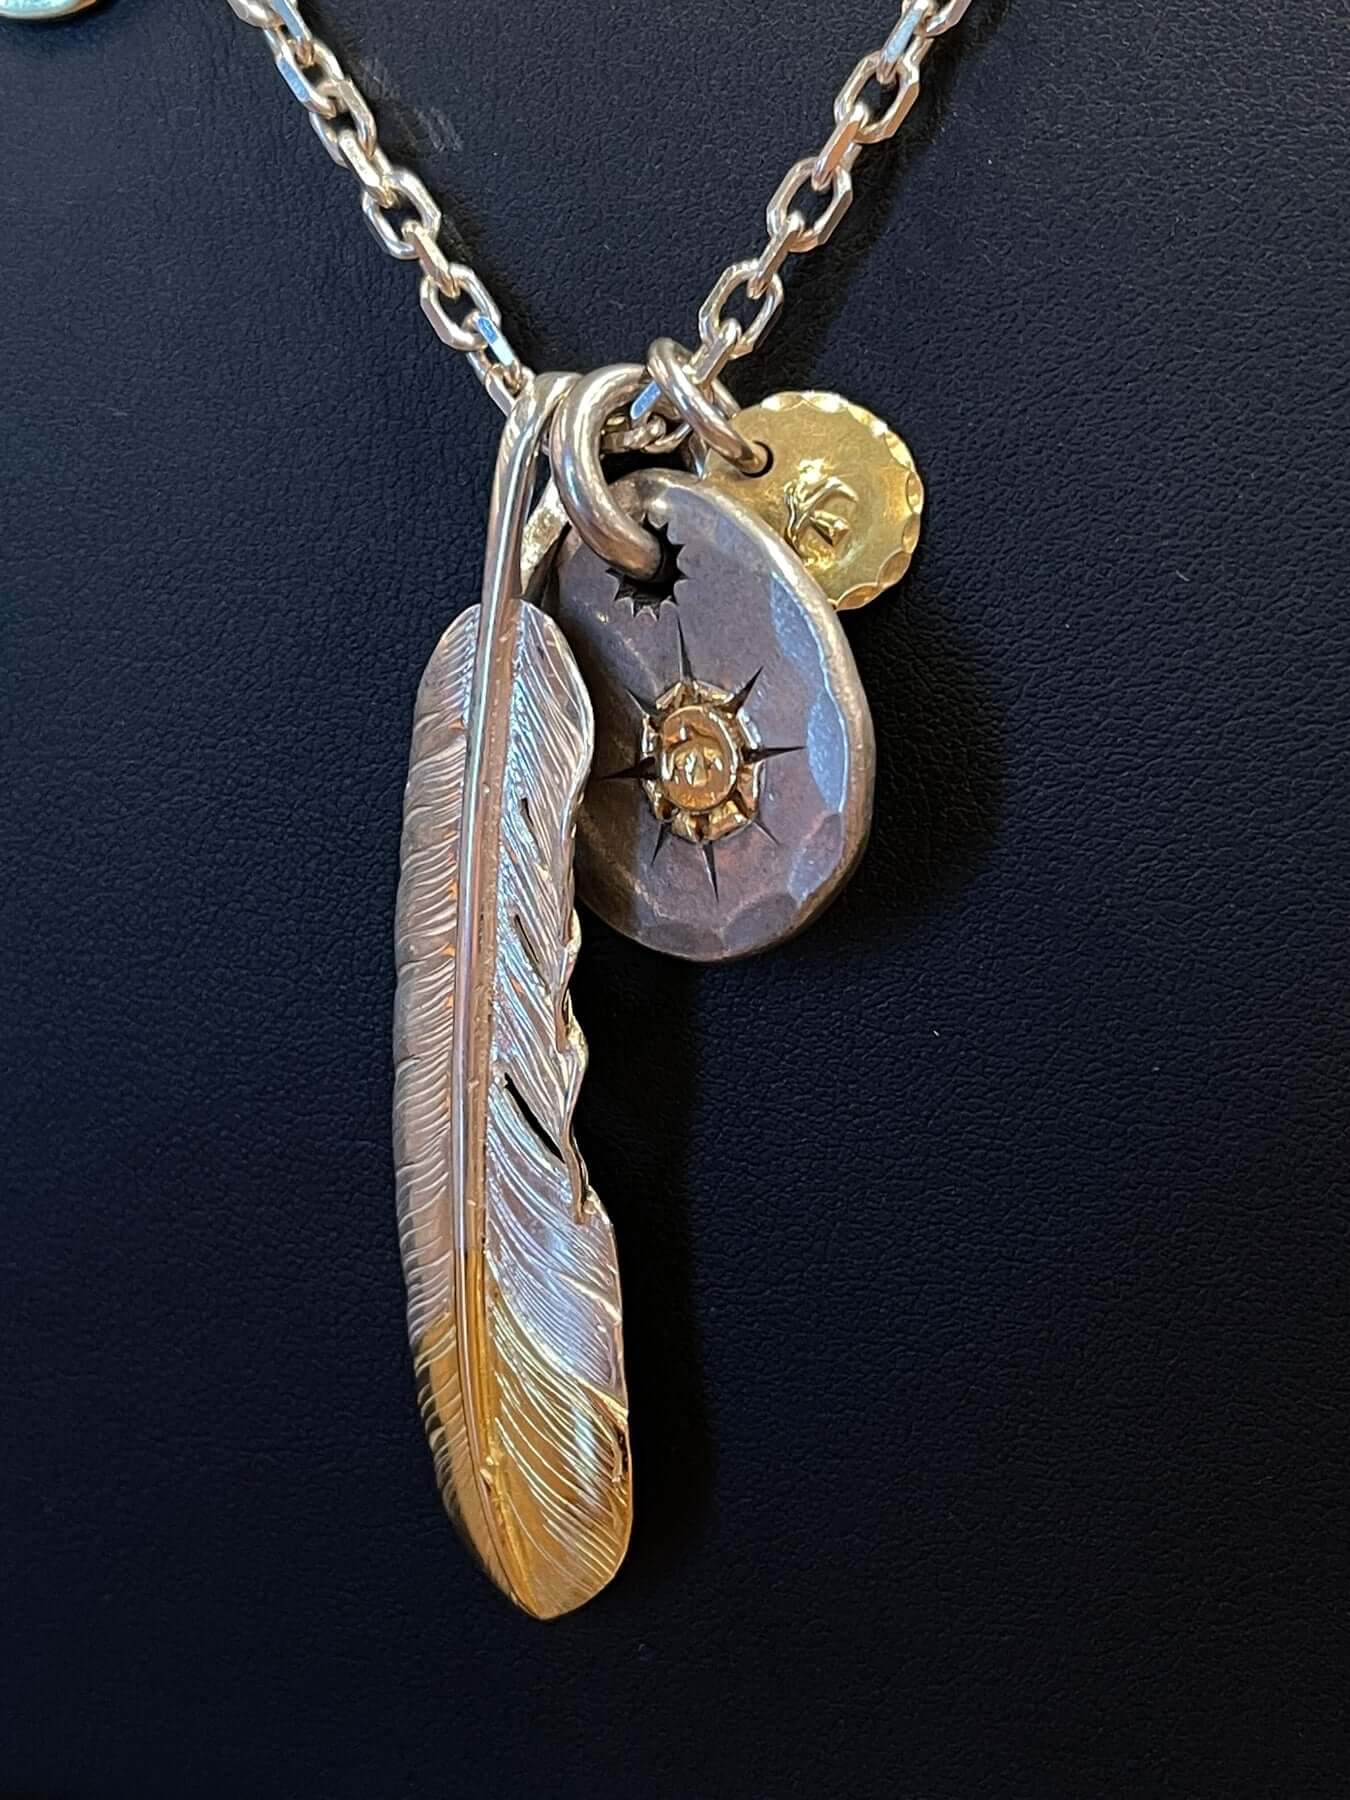 Goros Gold Tip Feather, Metal Pendant(S), K18 Sun Metal(S) With Small Cornered Chain With Wheel